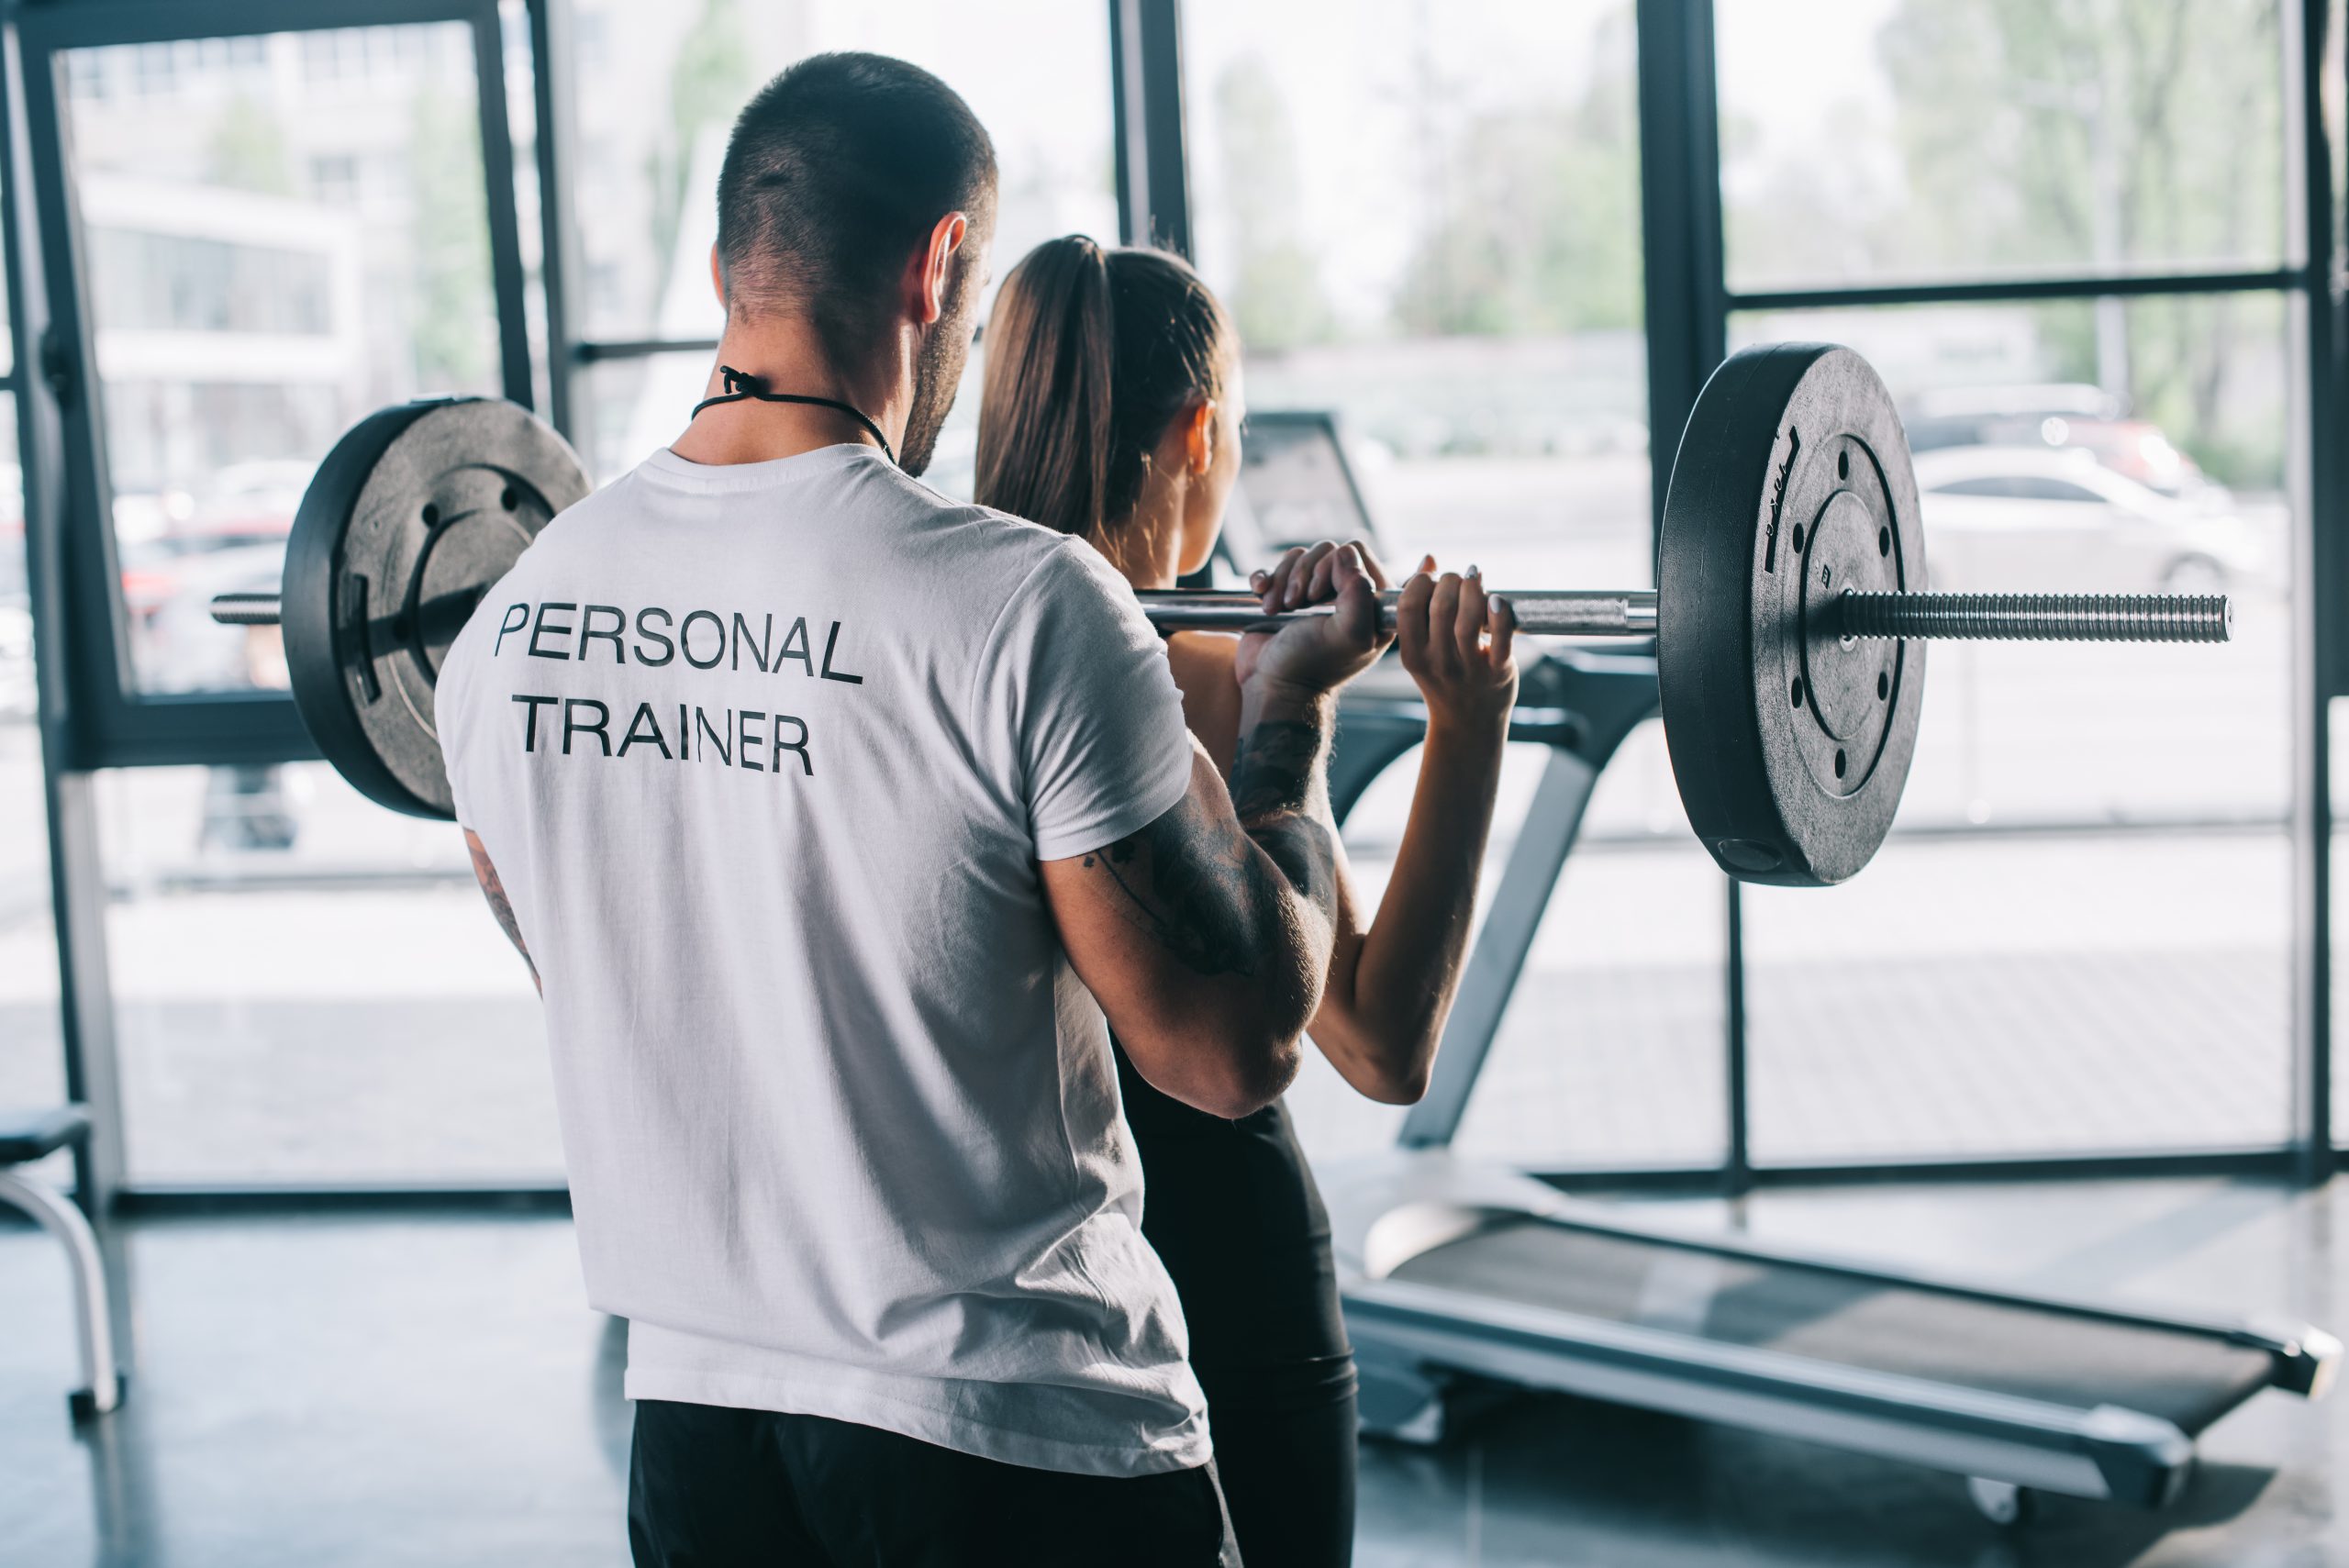 Personal Training course